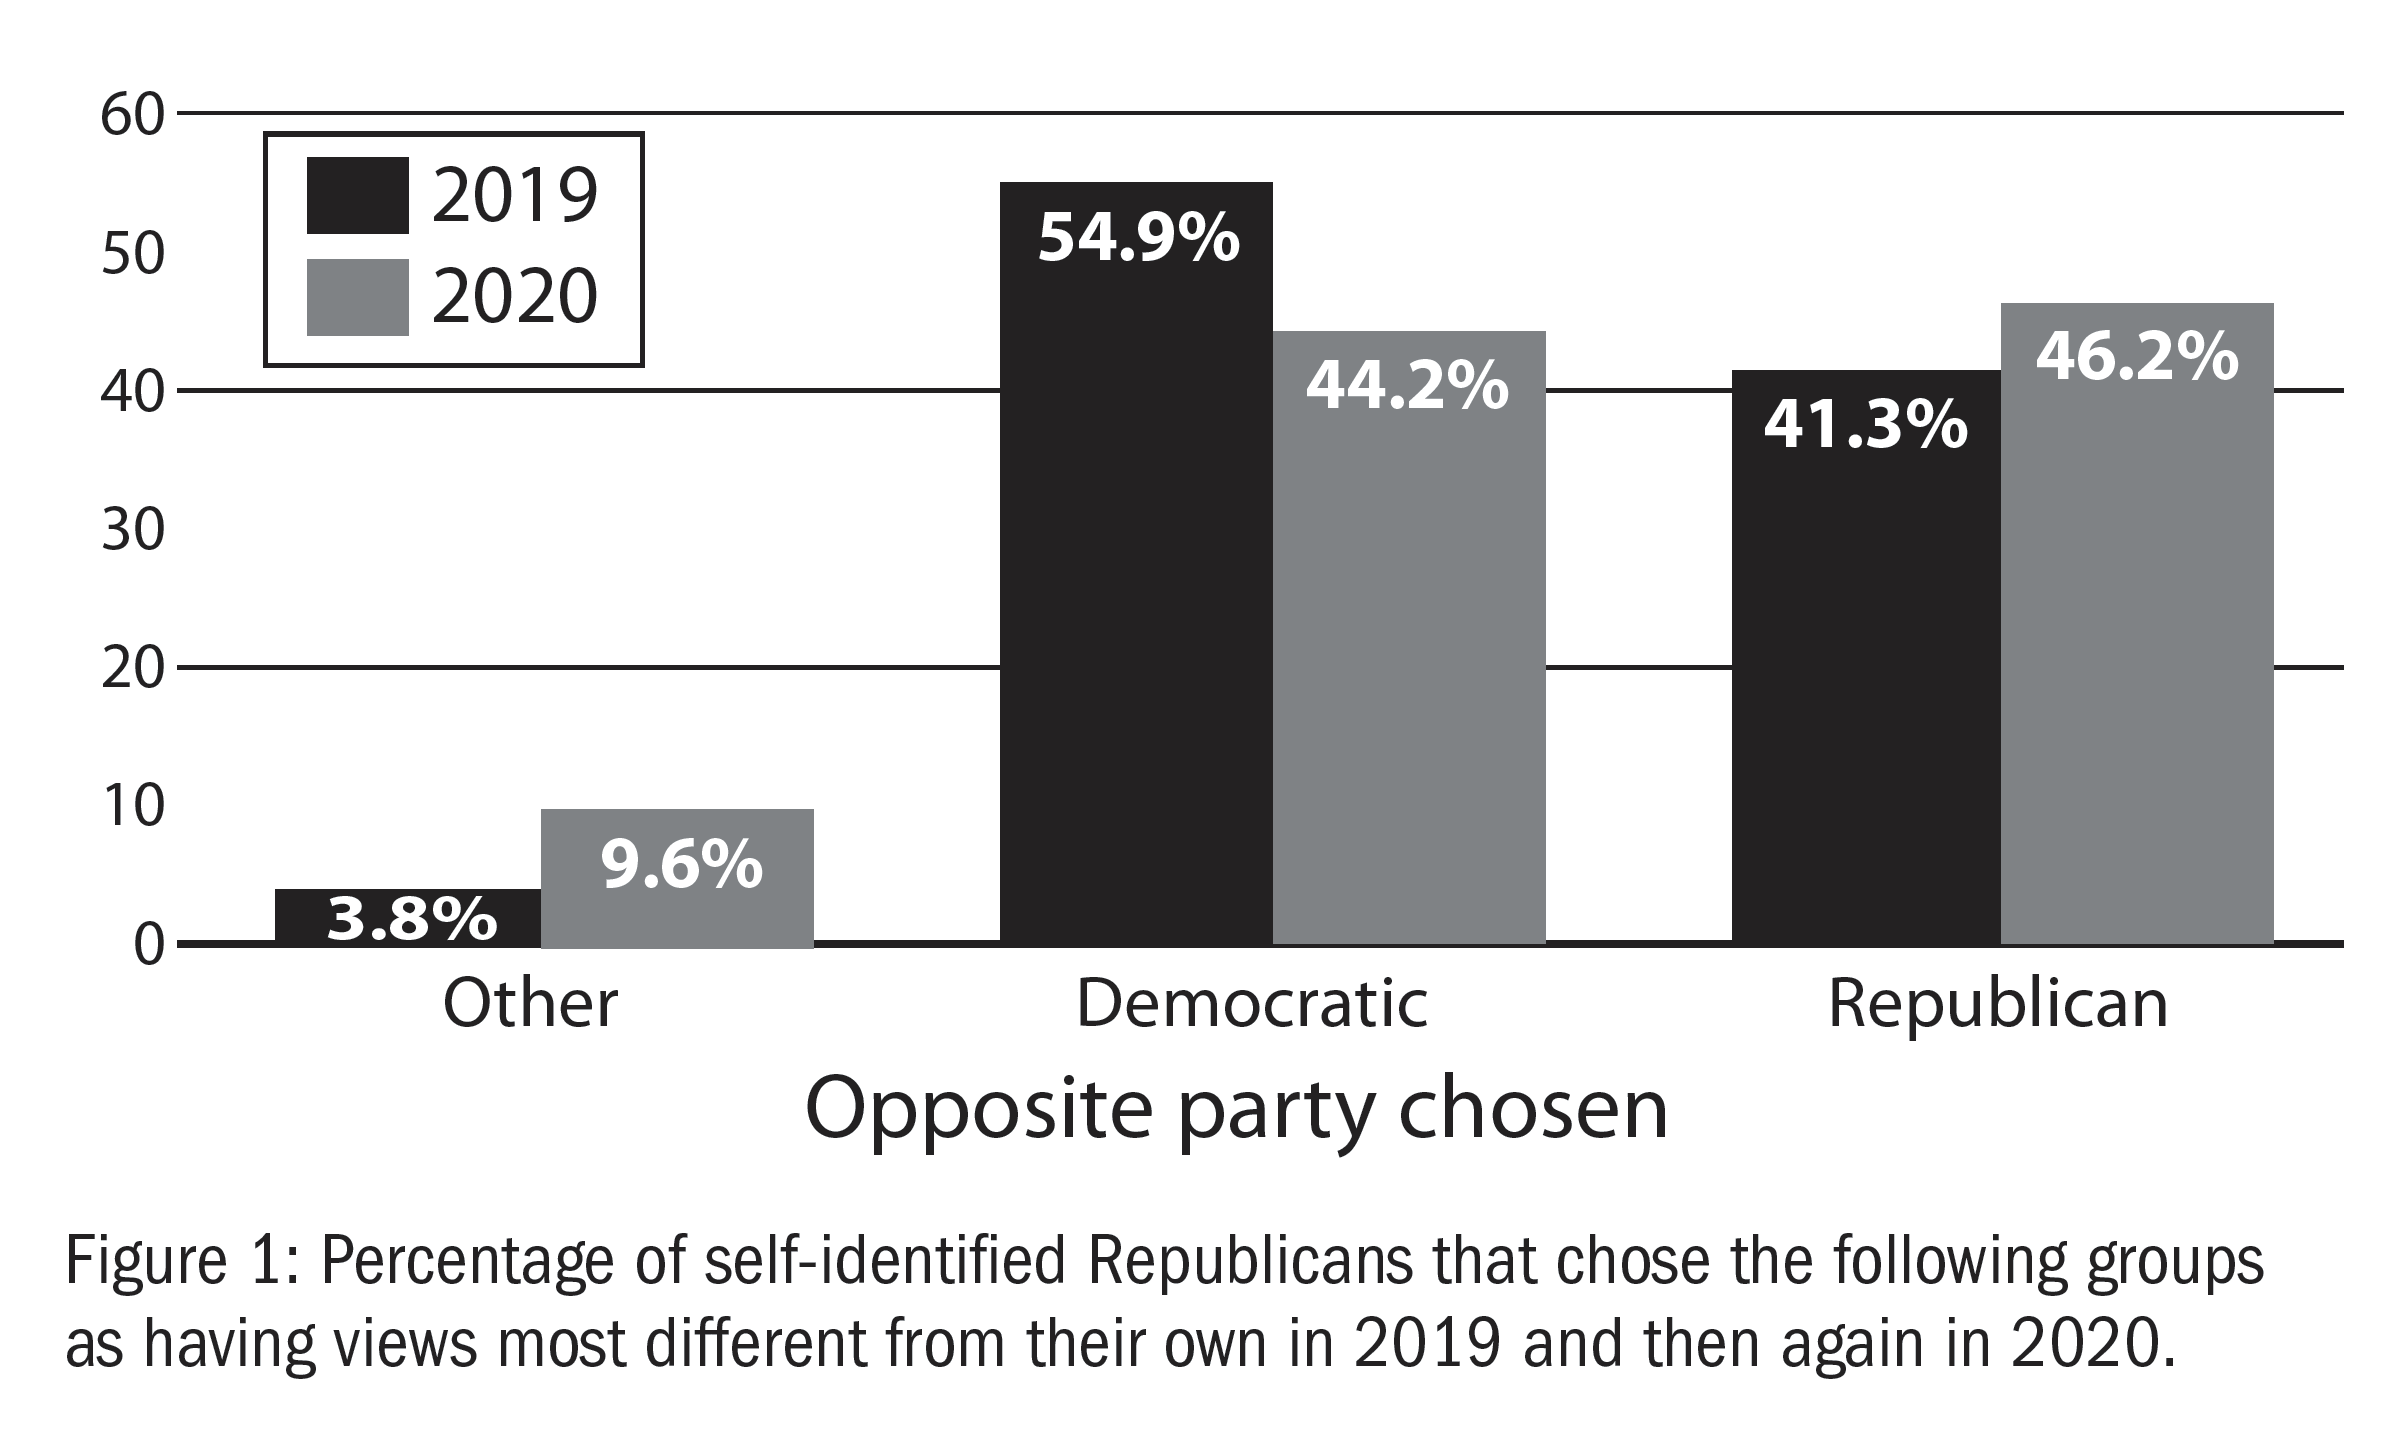 Figure 1: Percentage of self-identified Republicans that chose the following groups as having views most different from their own in 2019 and then again in 2020